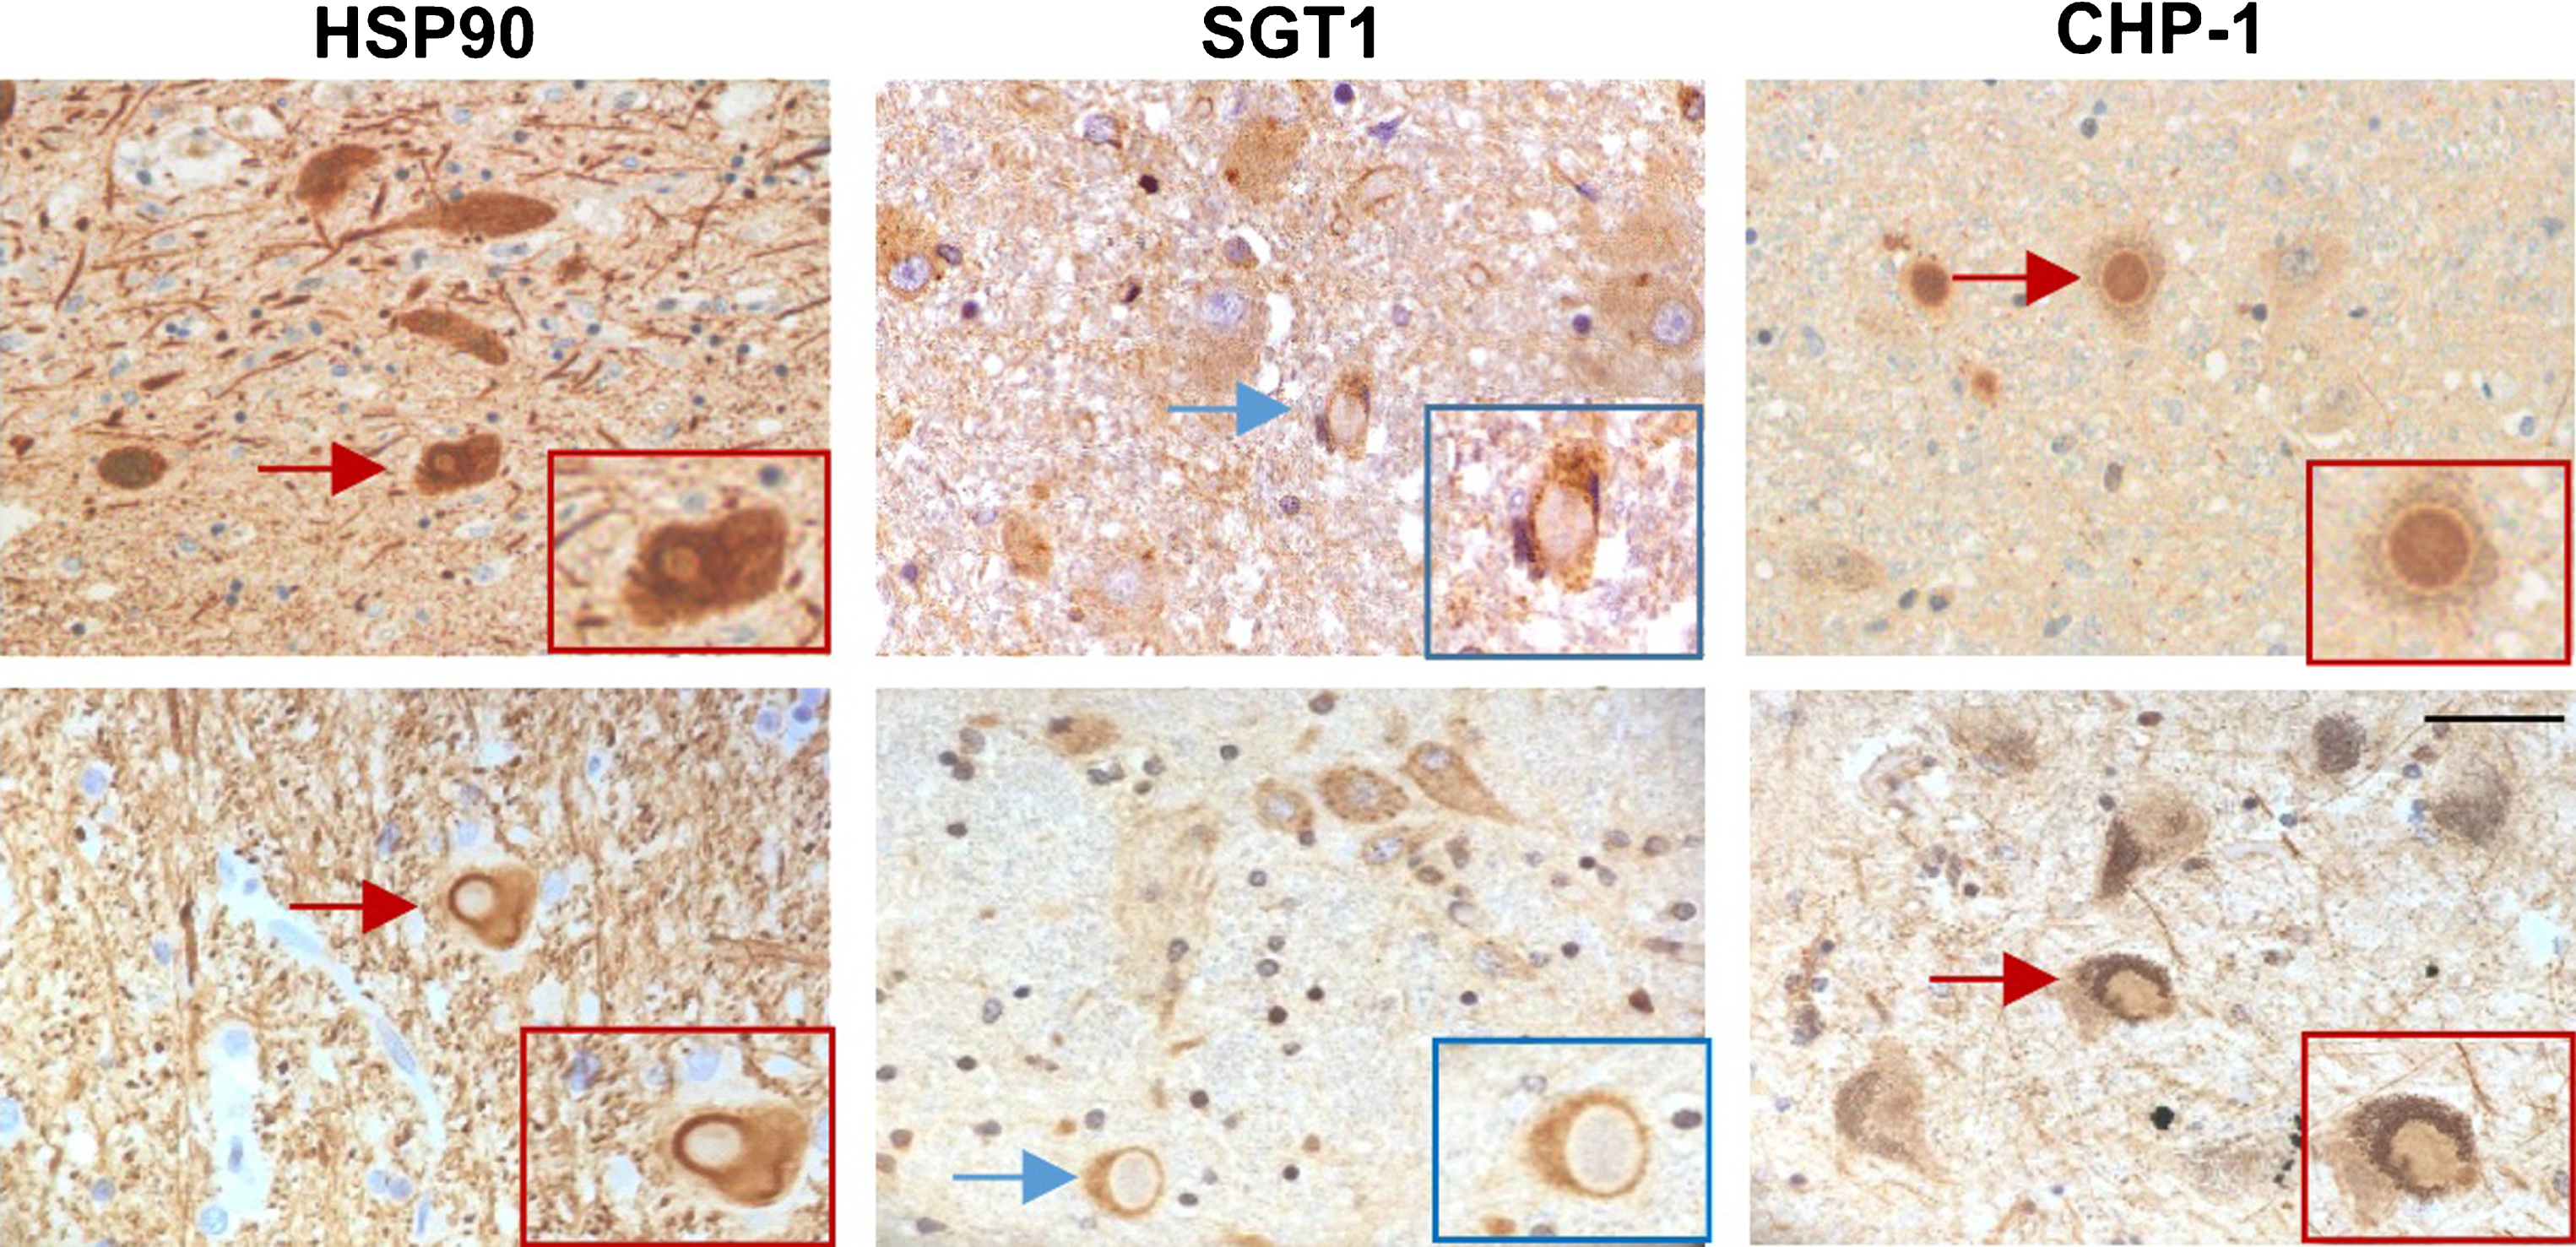 Localization of HSP90, SGT1 and CHP-1 in Lewy bodies in the substantia nigra of PD (upper panel) and DLB brain (lower panel). Scale bar is 50μm.